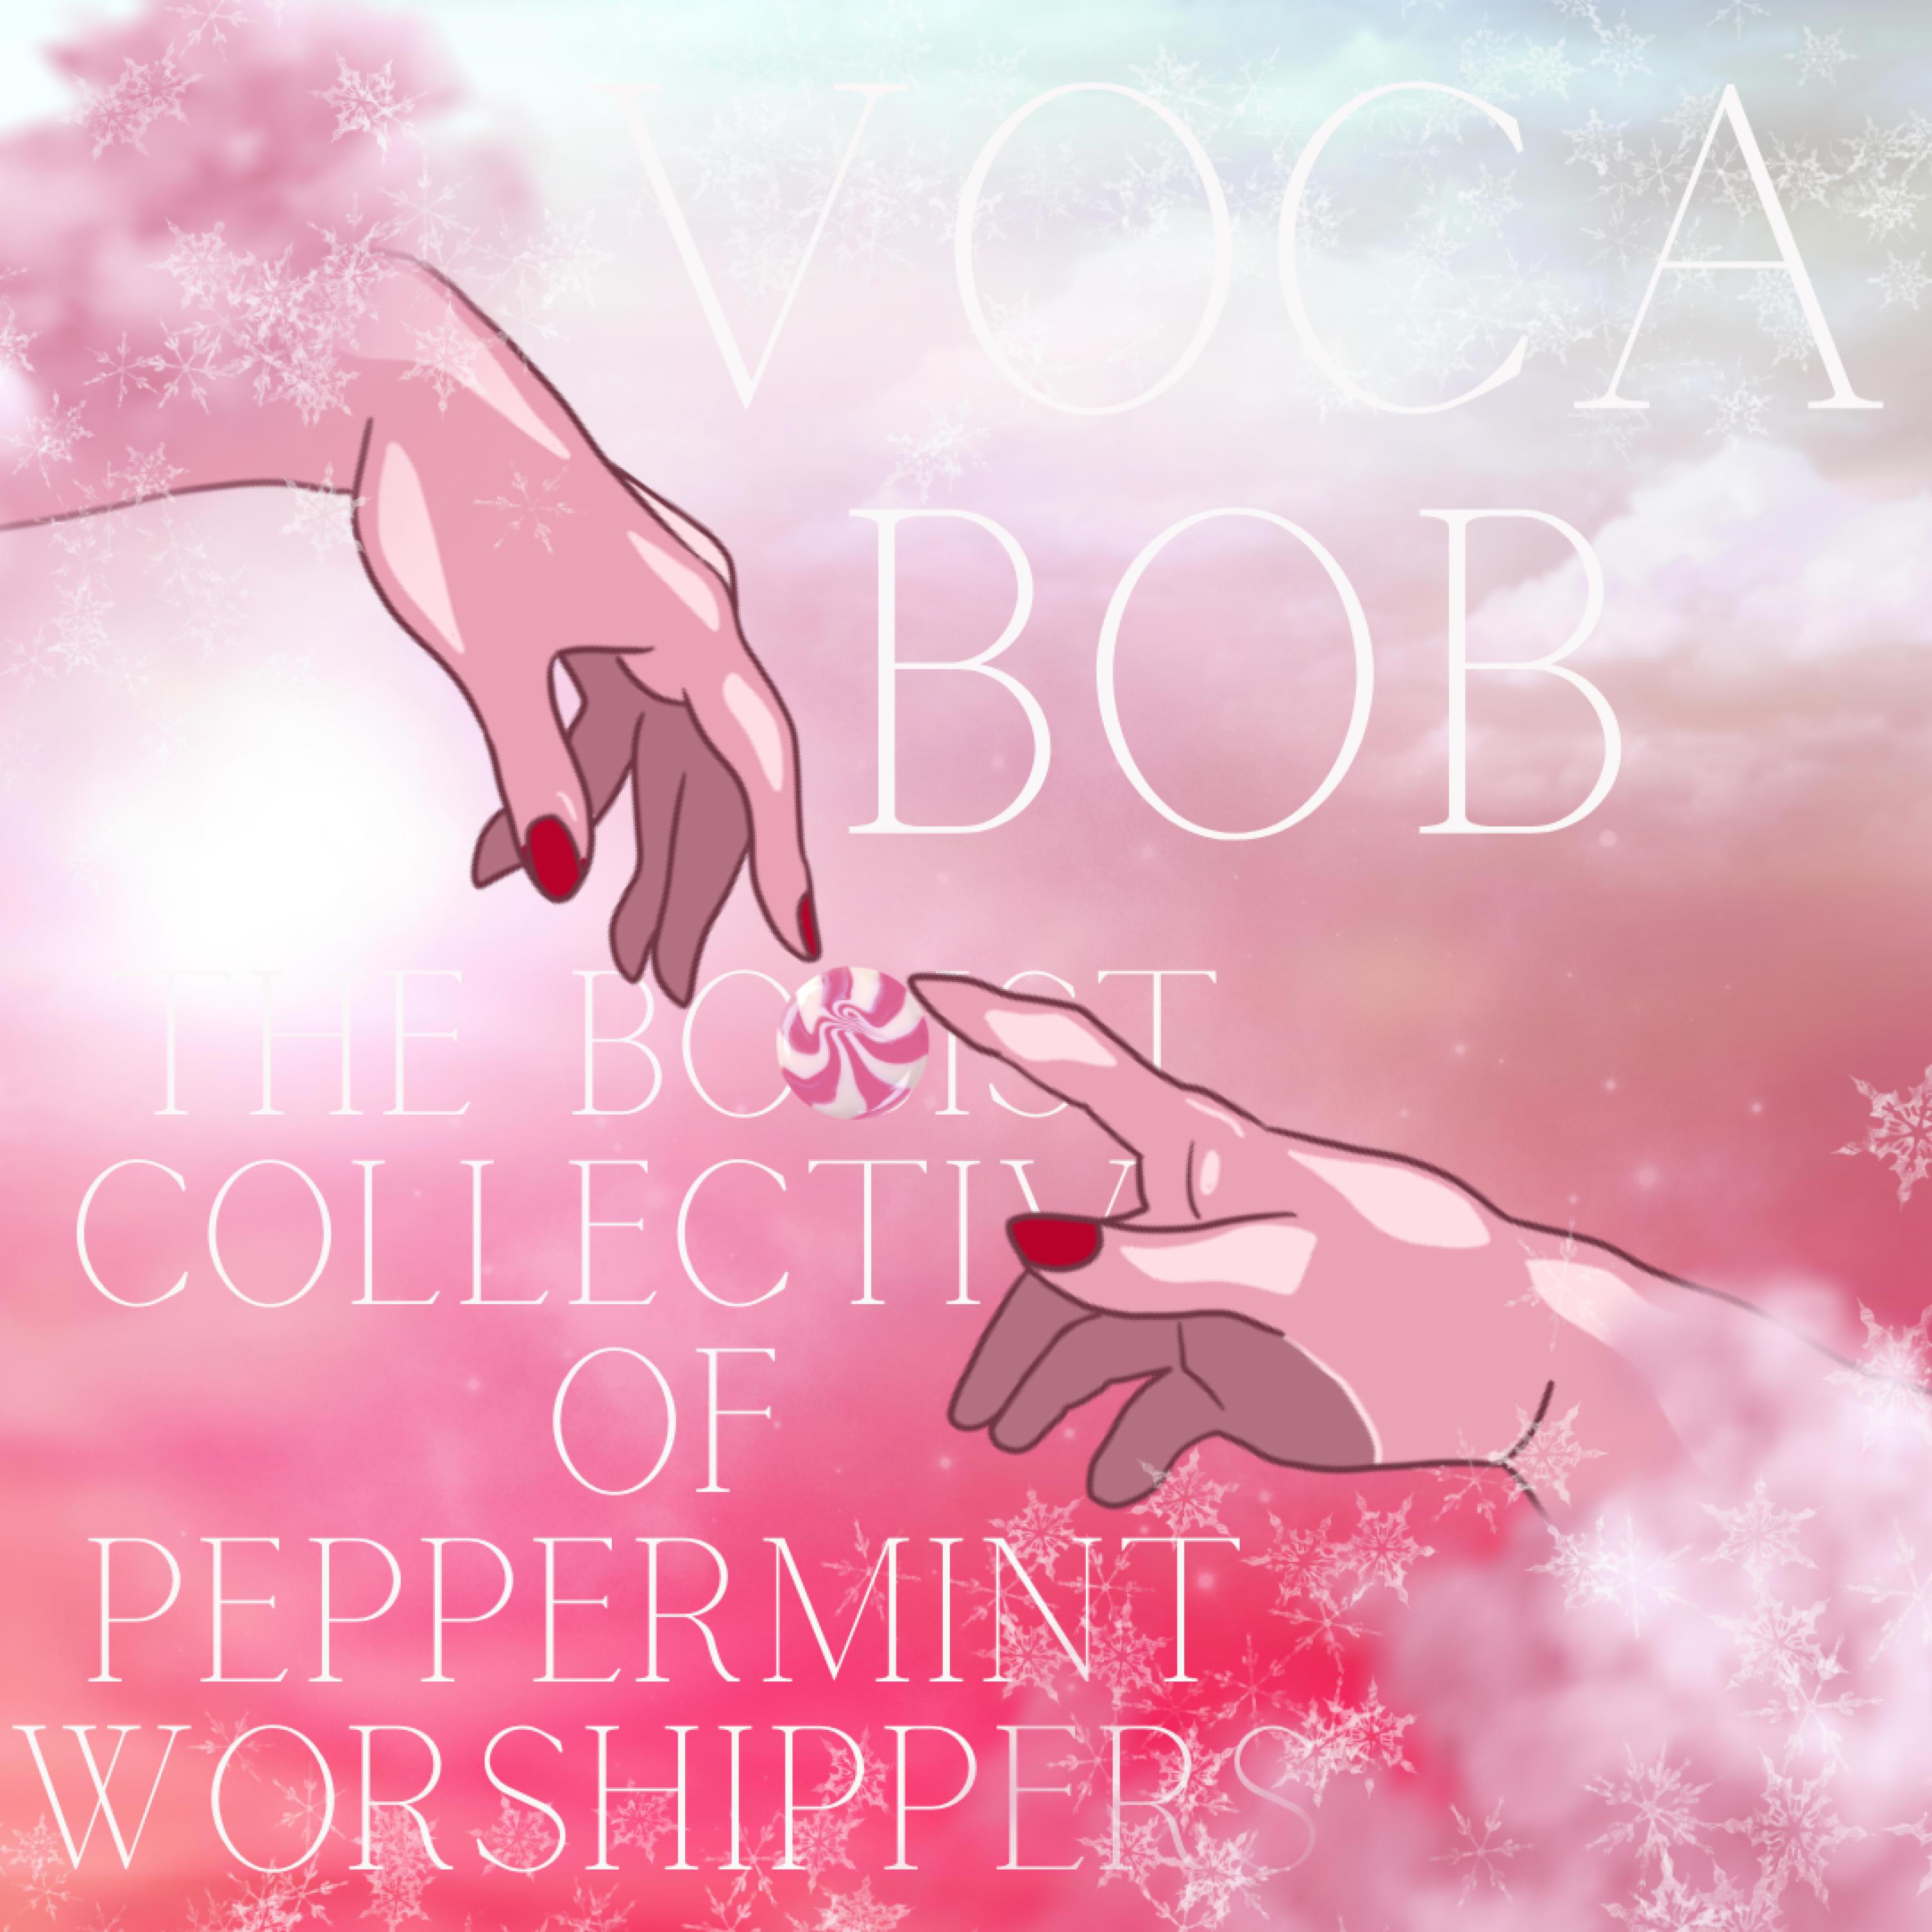 The Bobist Collective of Peppermint Worshippers - Kill The Council